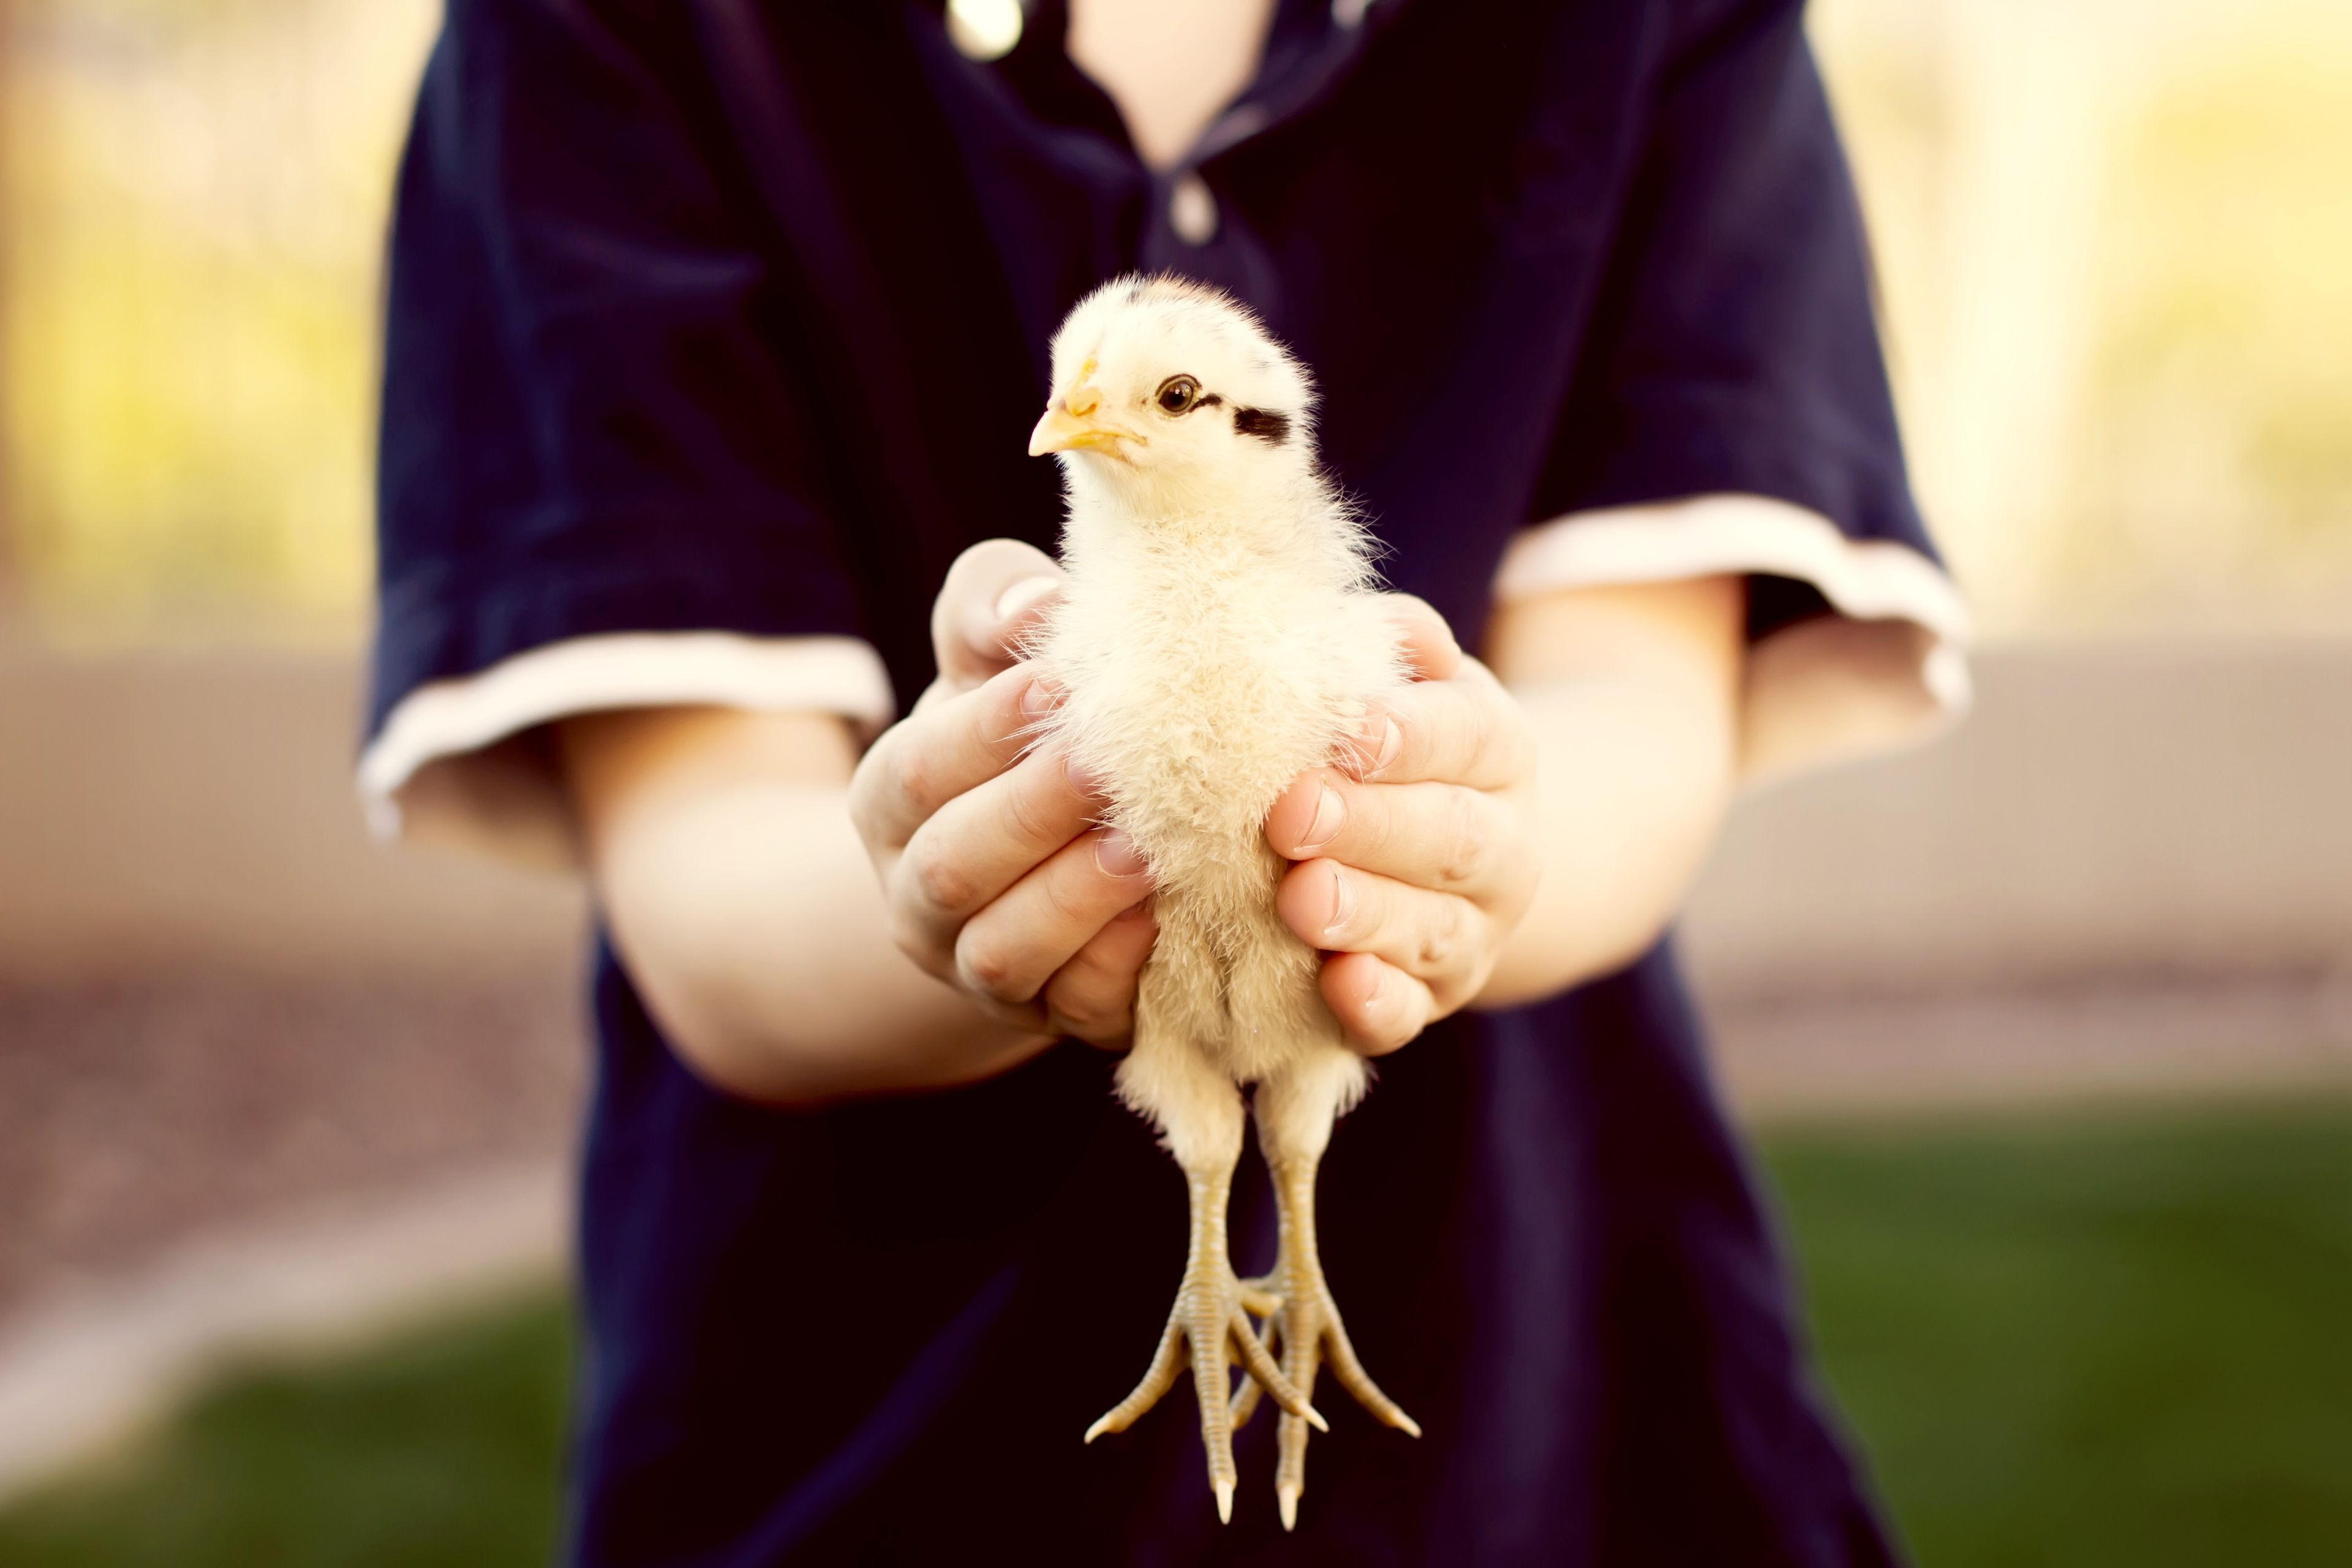 A child holds a young chicken.